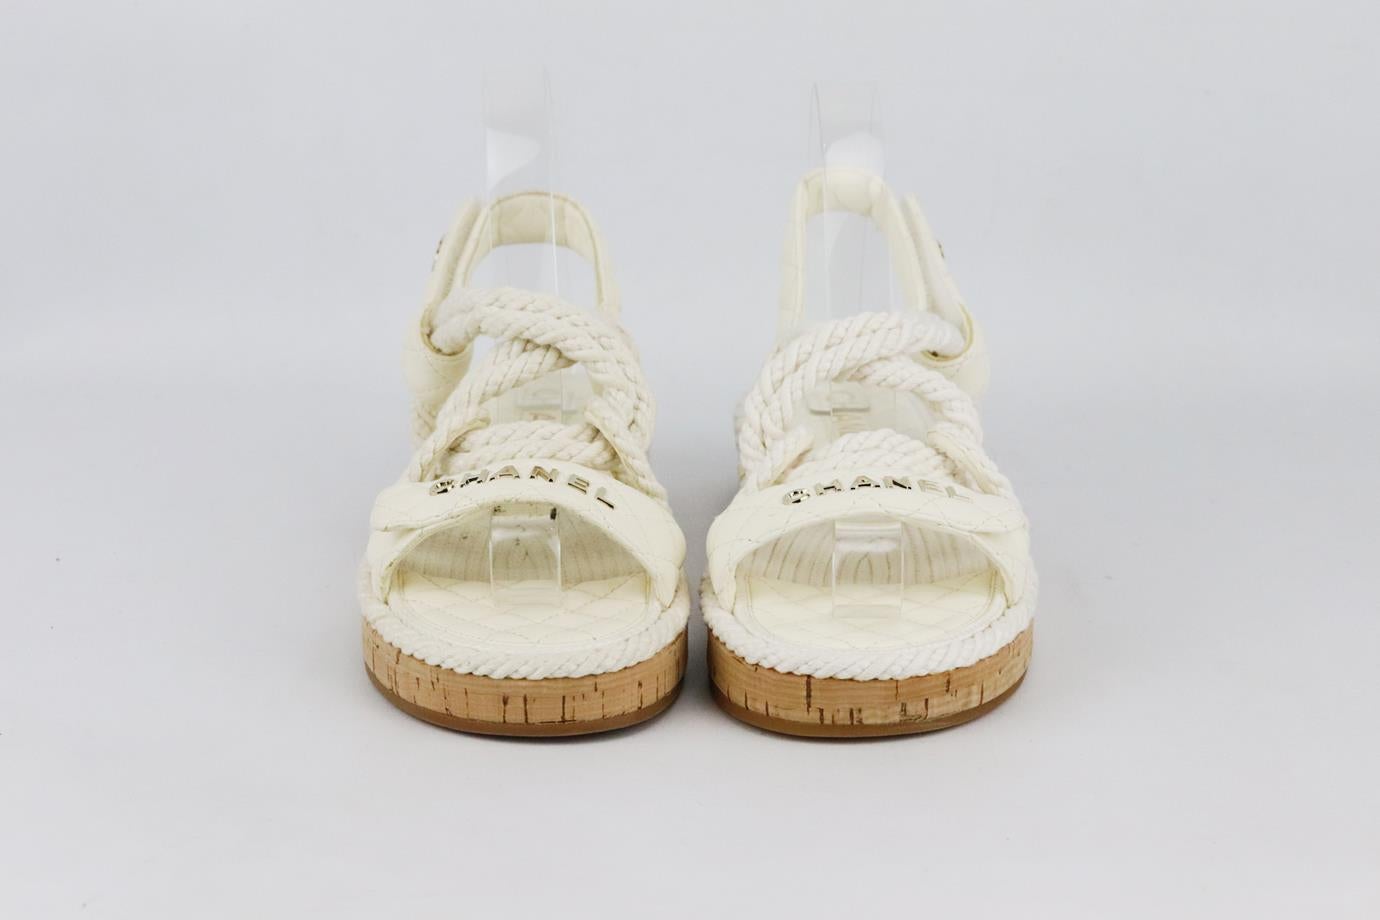 Chanel 2021 CC detailed rope and quilted leather sandals. Made from ivory quilted leather and rope with gold-tone CC and logo detail and cook soles. Ivory. Fastening at side. Does not come with box or dustbag. Size: EU 38 (UK 5, US 8). Insole: 9.8